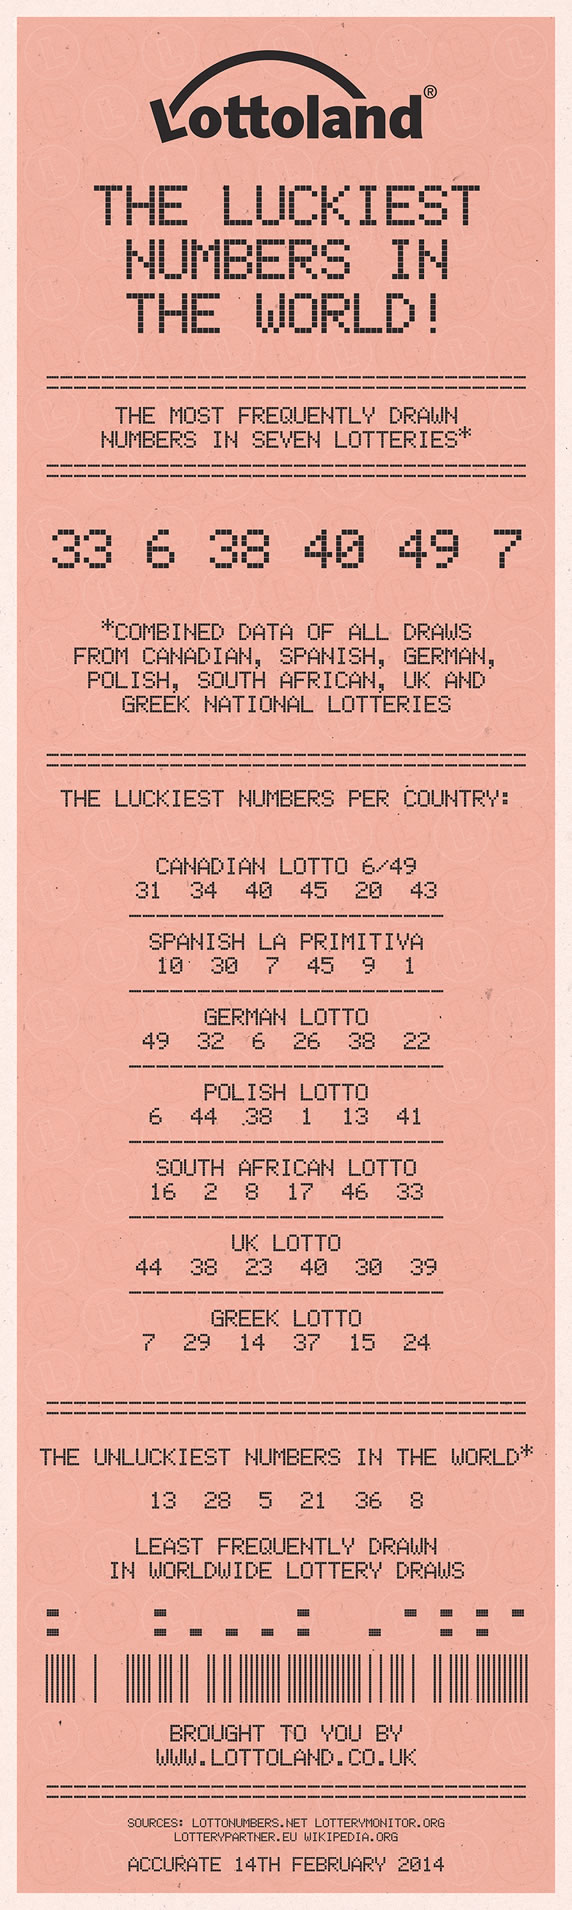 How Many Lotto Numbers Are There